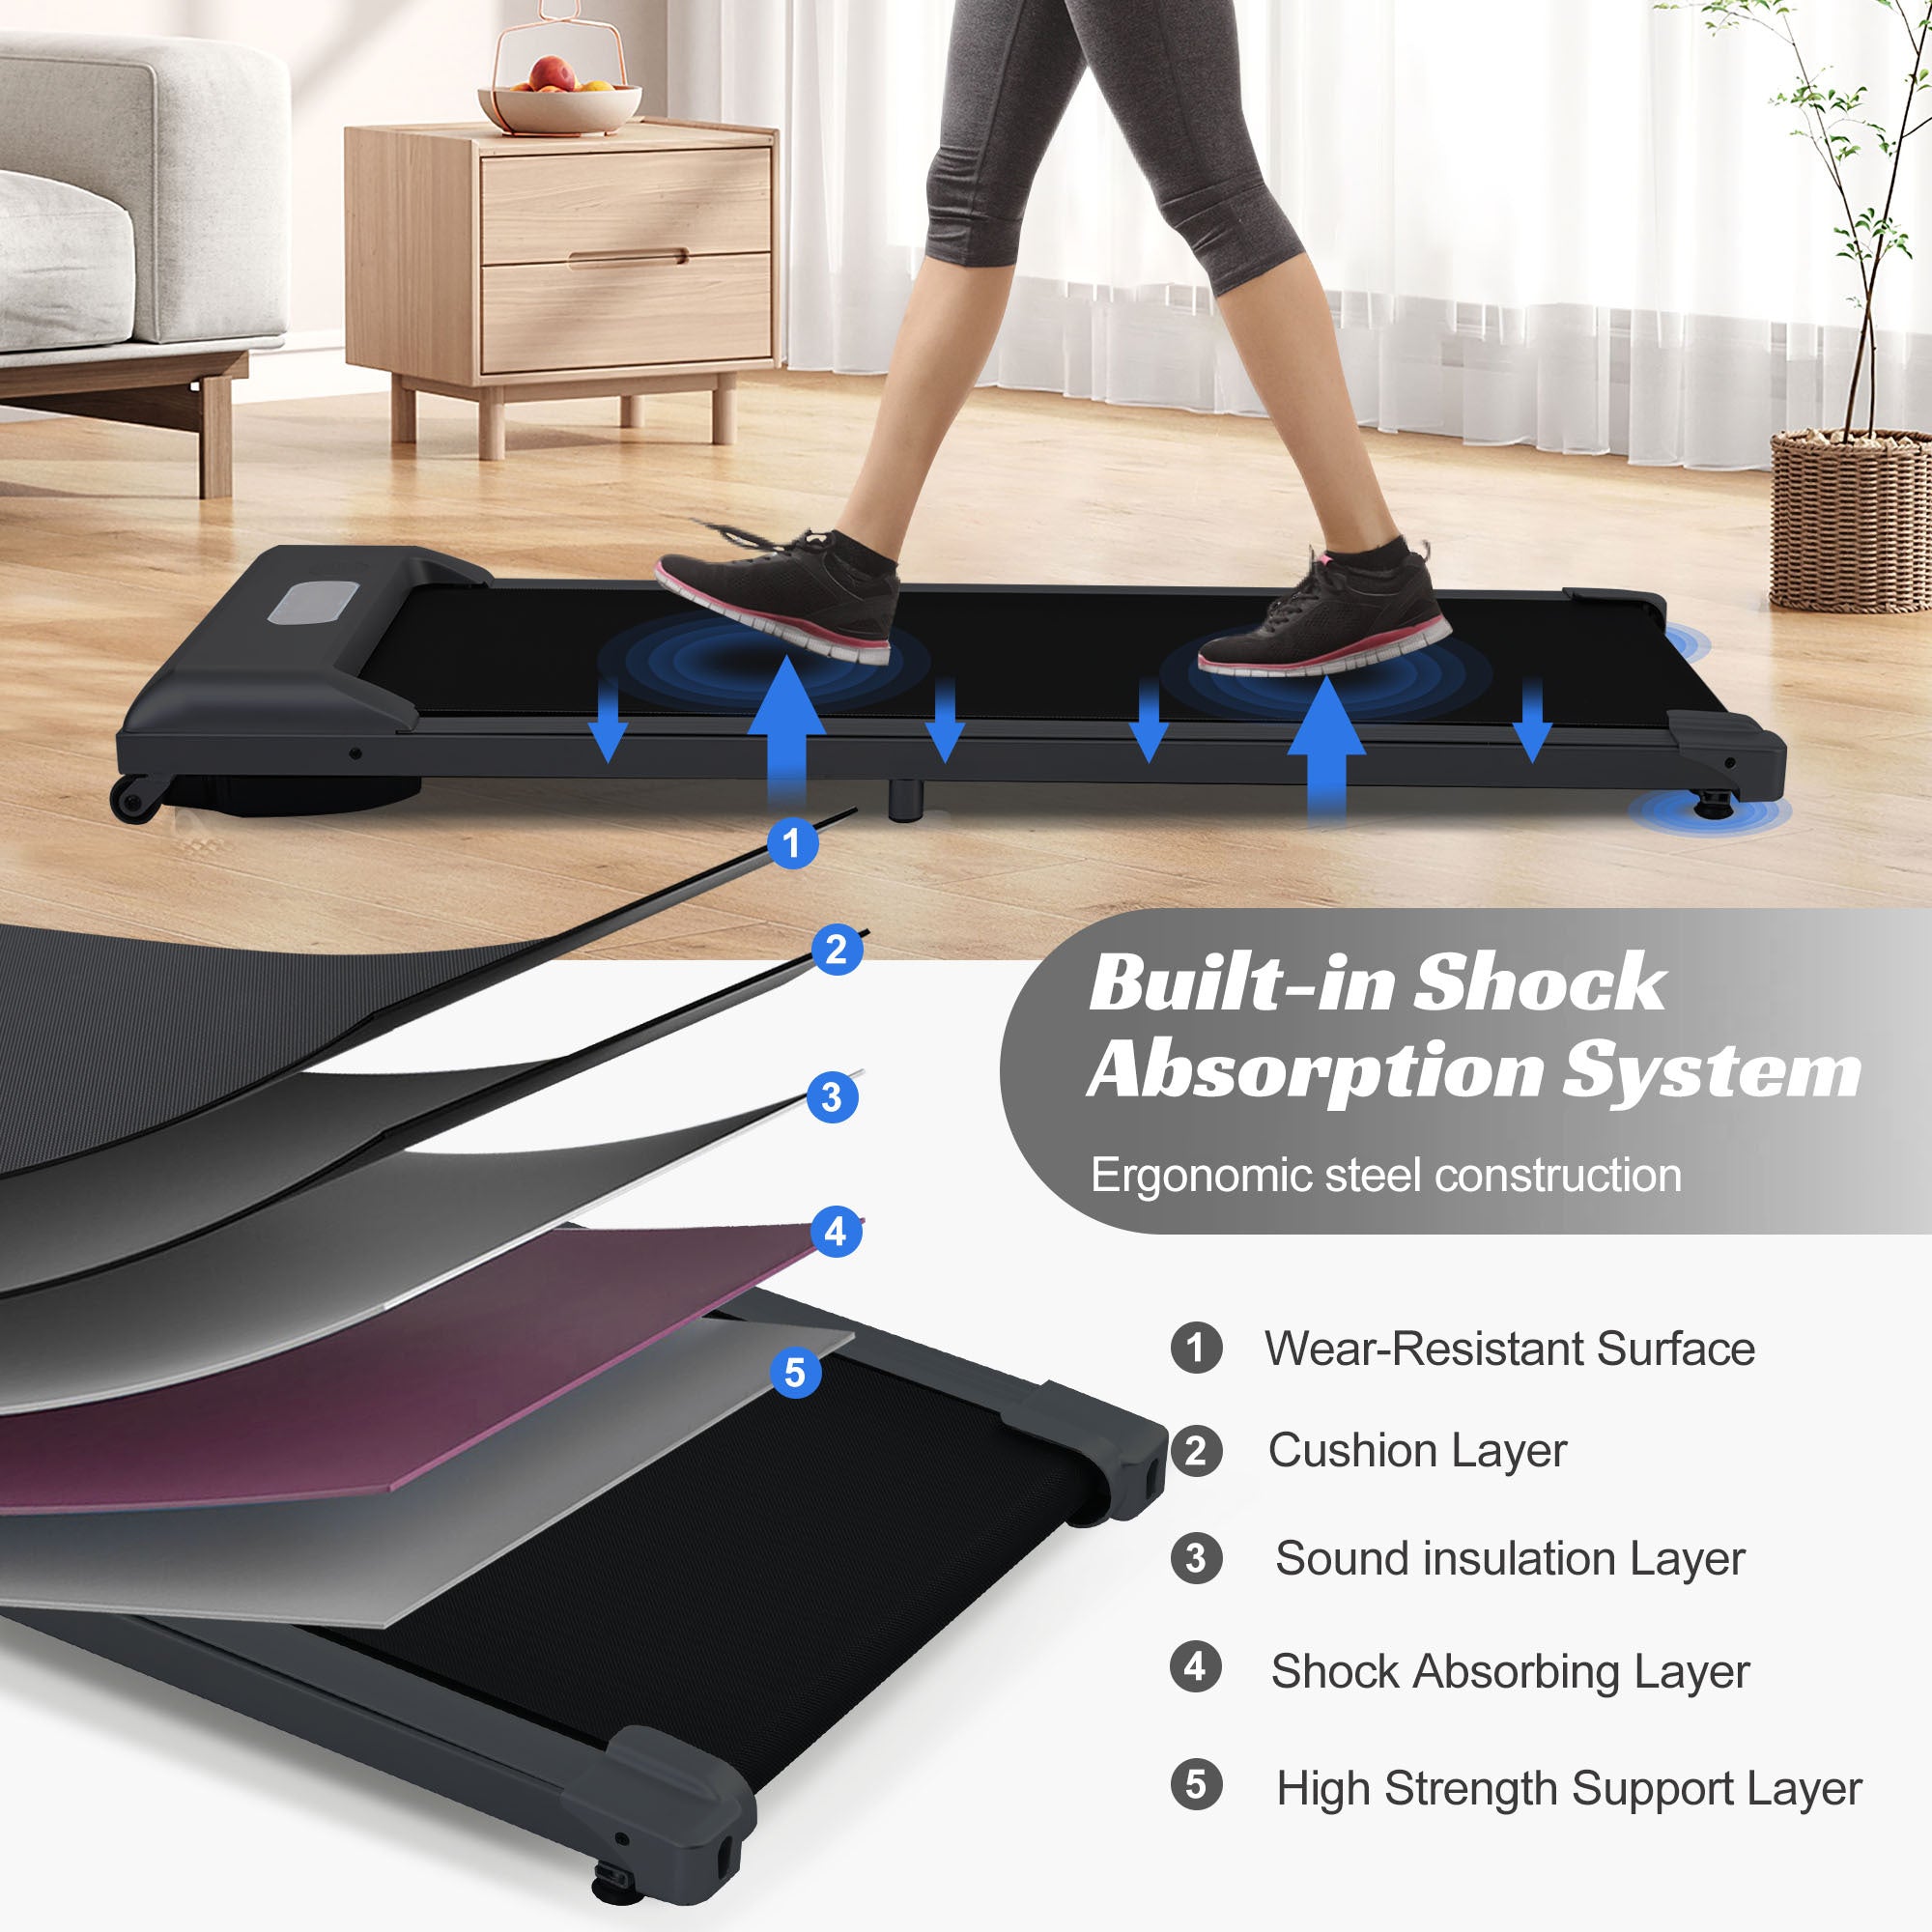 2 in 1 Under Desk Electric Treadmill 2.5HP, with black-metal